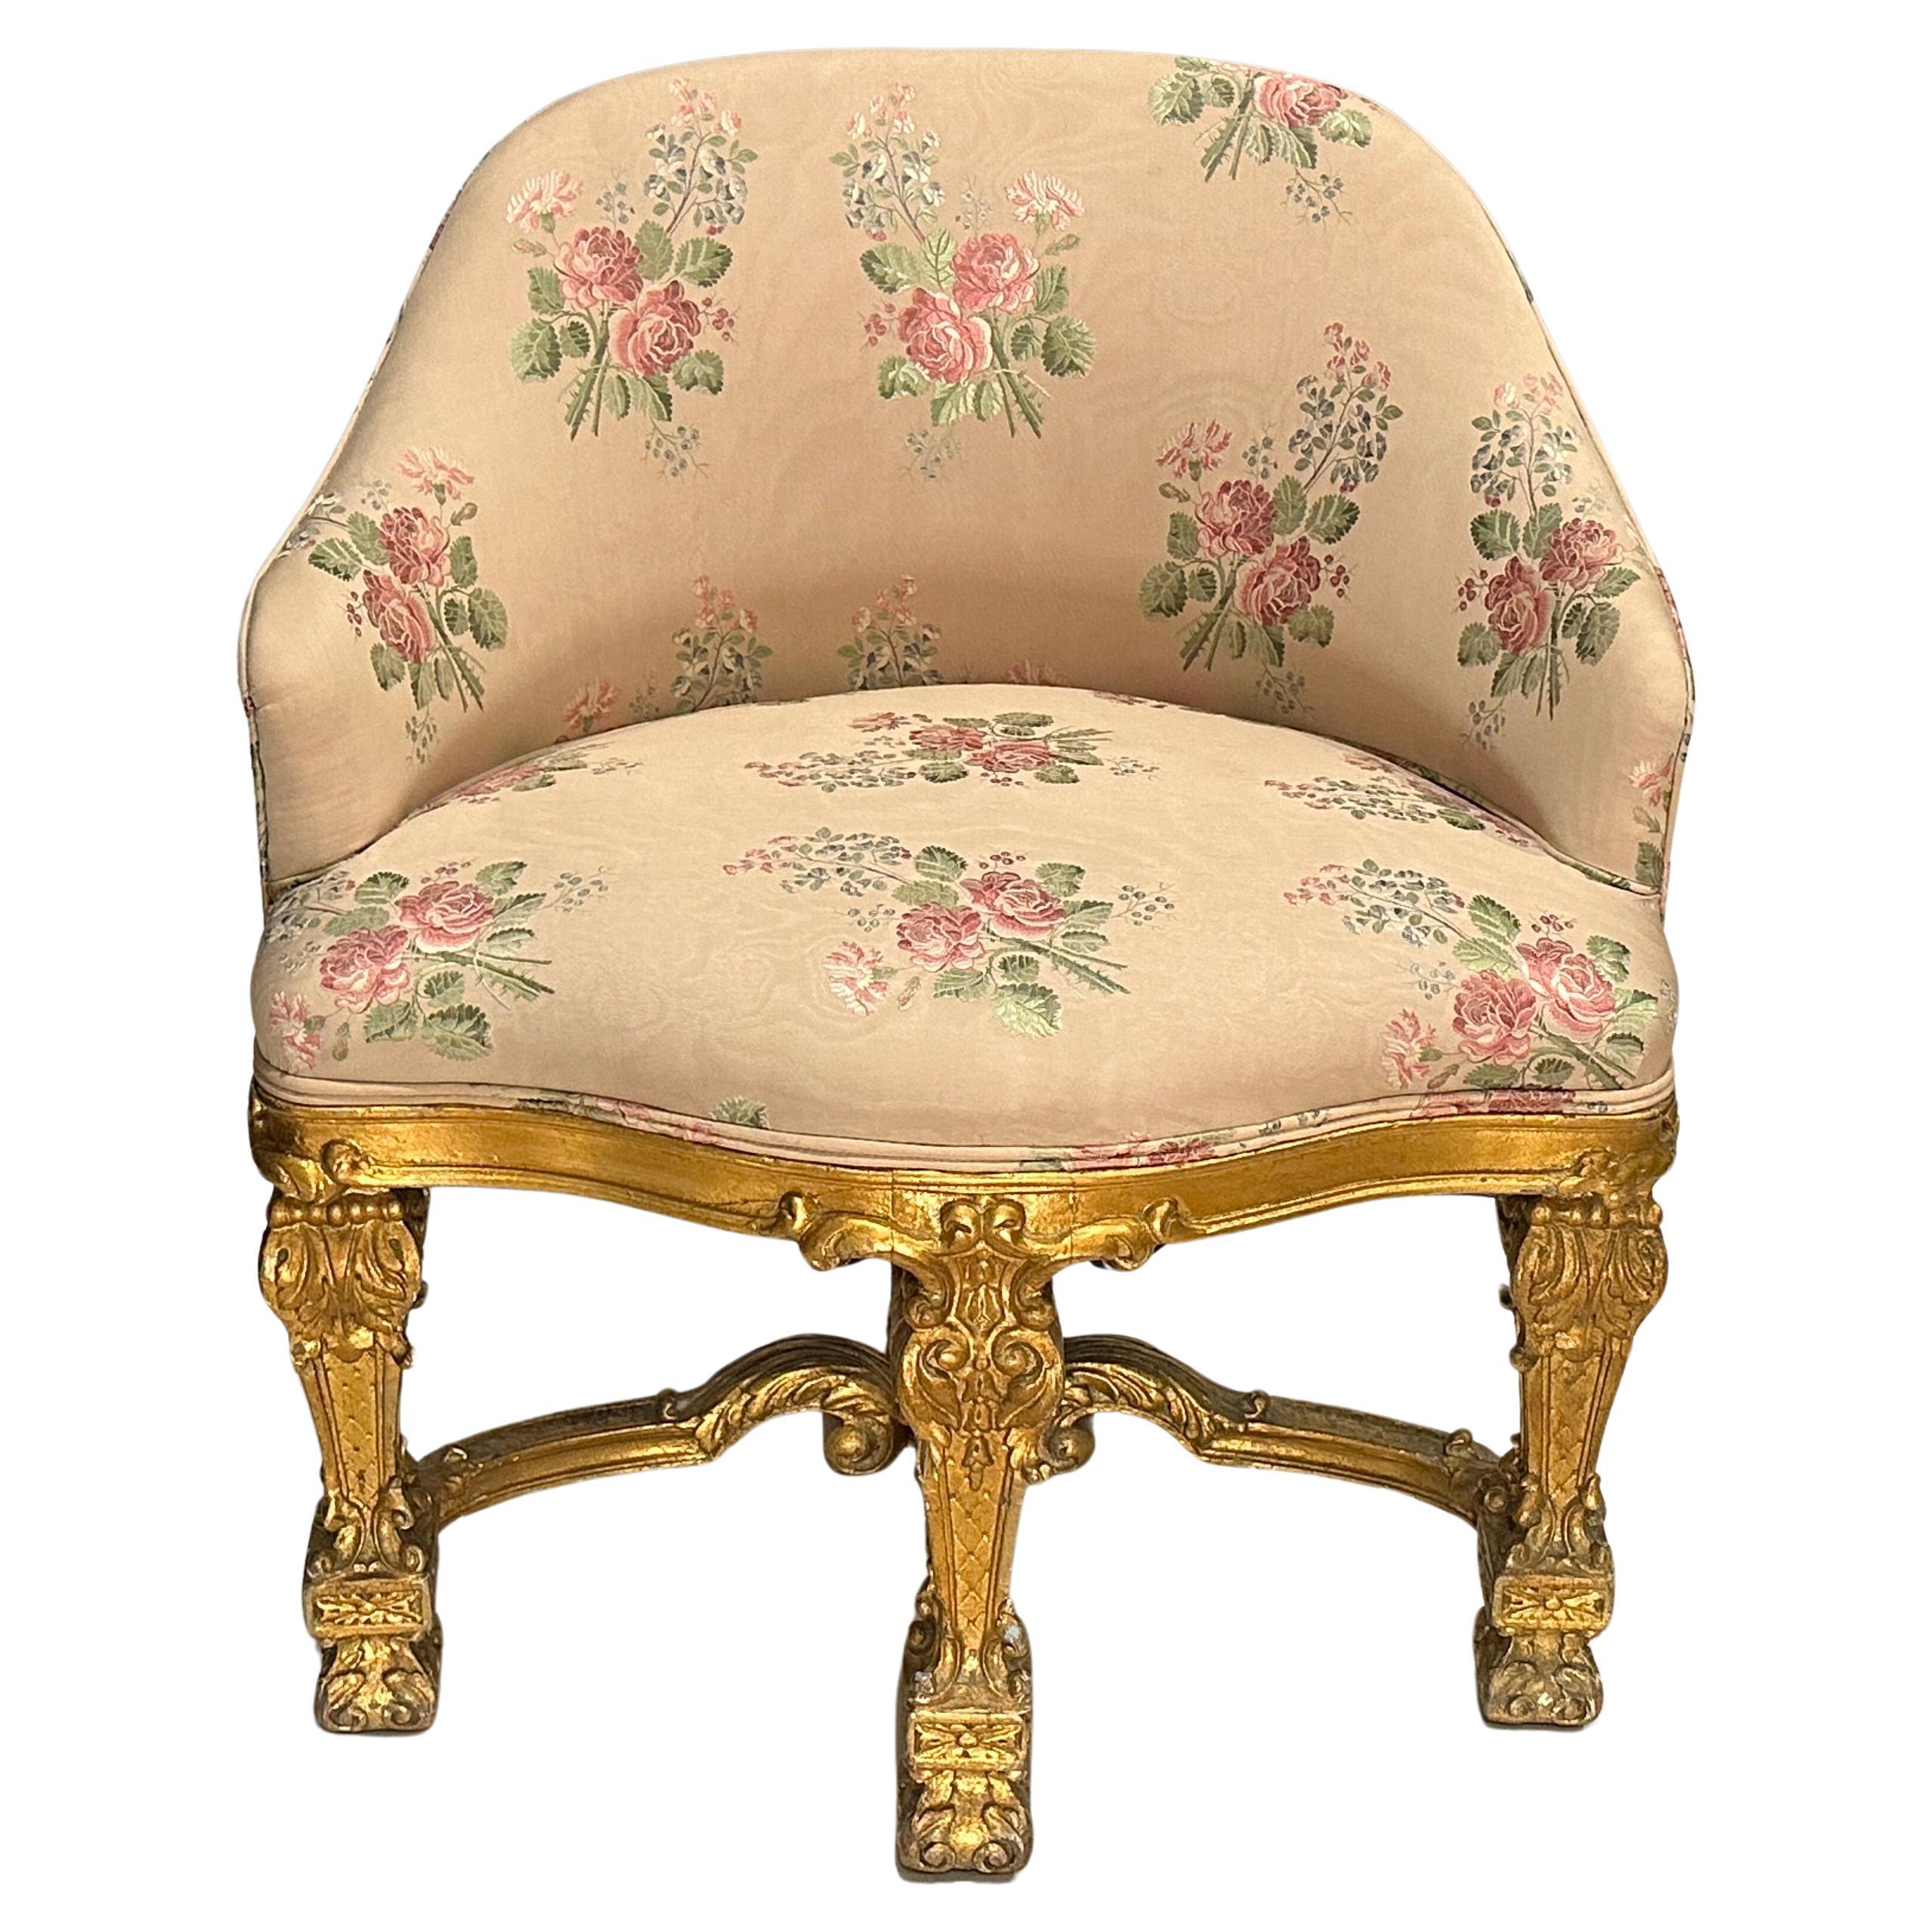 19th Century Carved And Gilt Vanity Chair